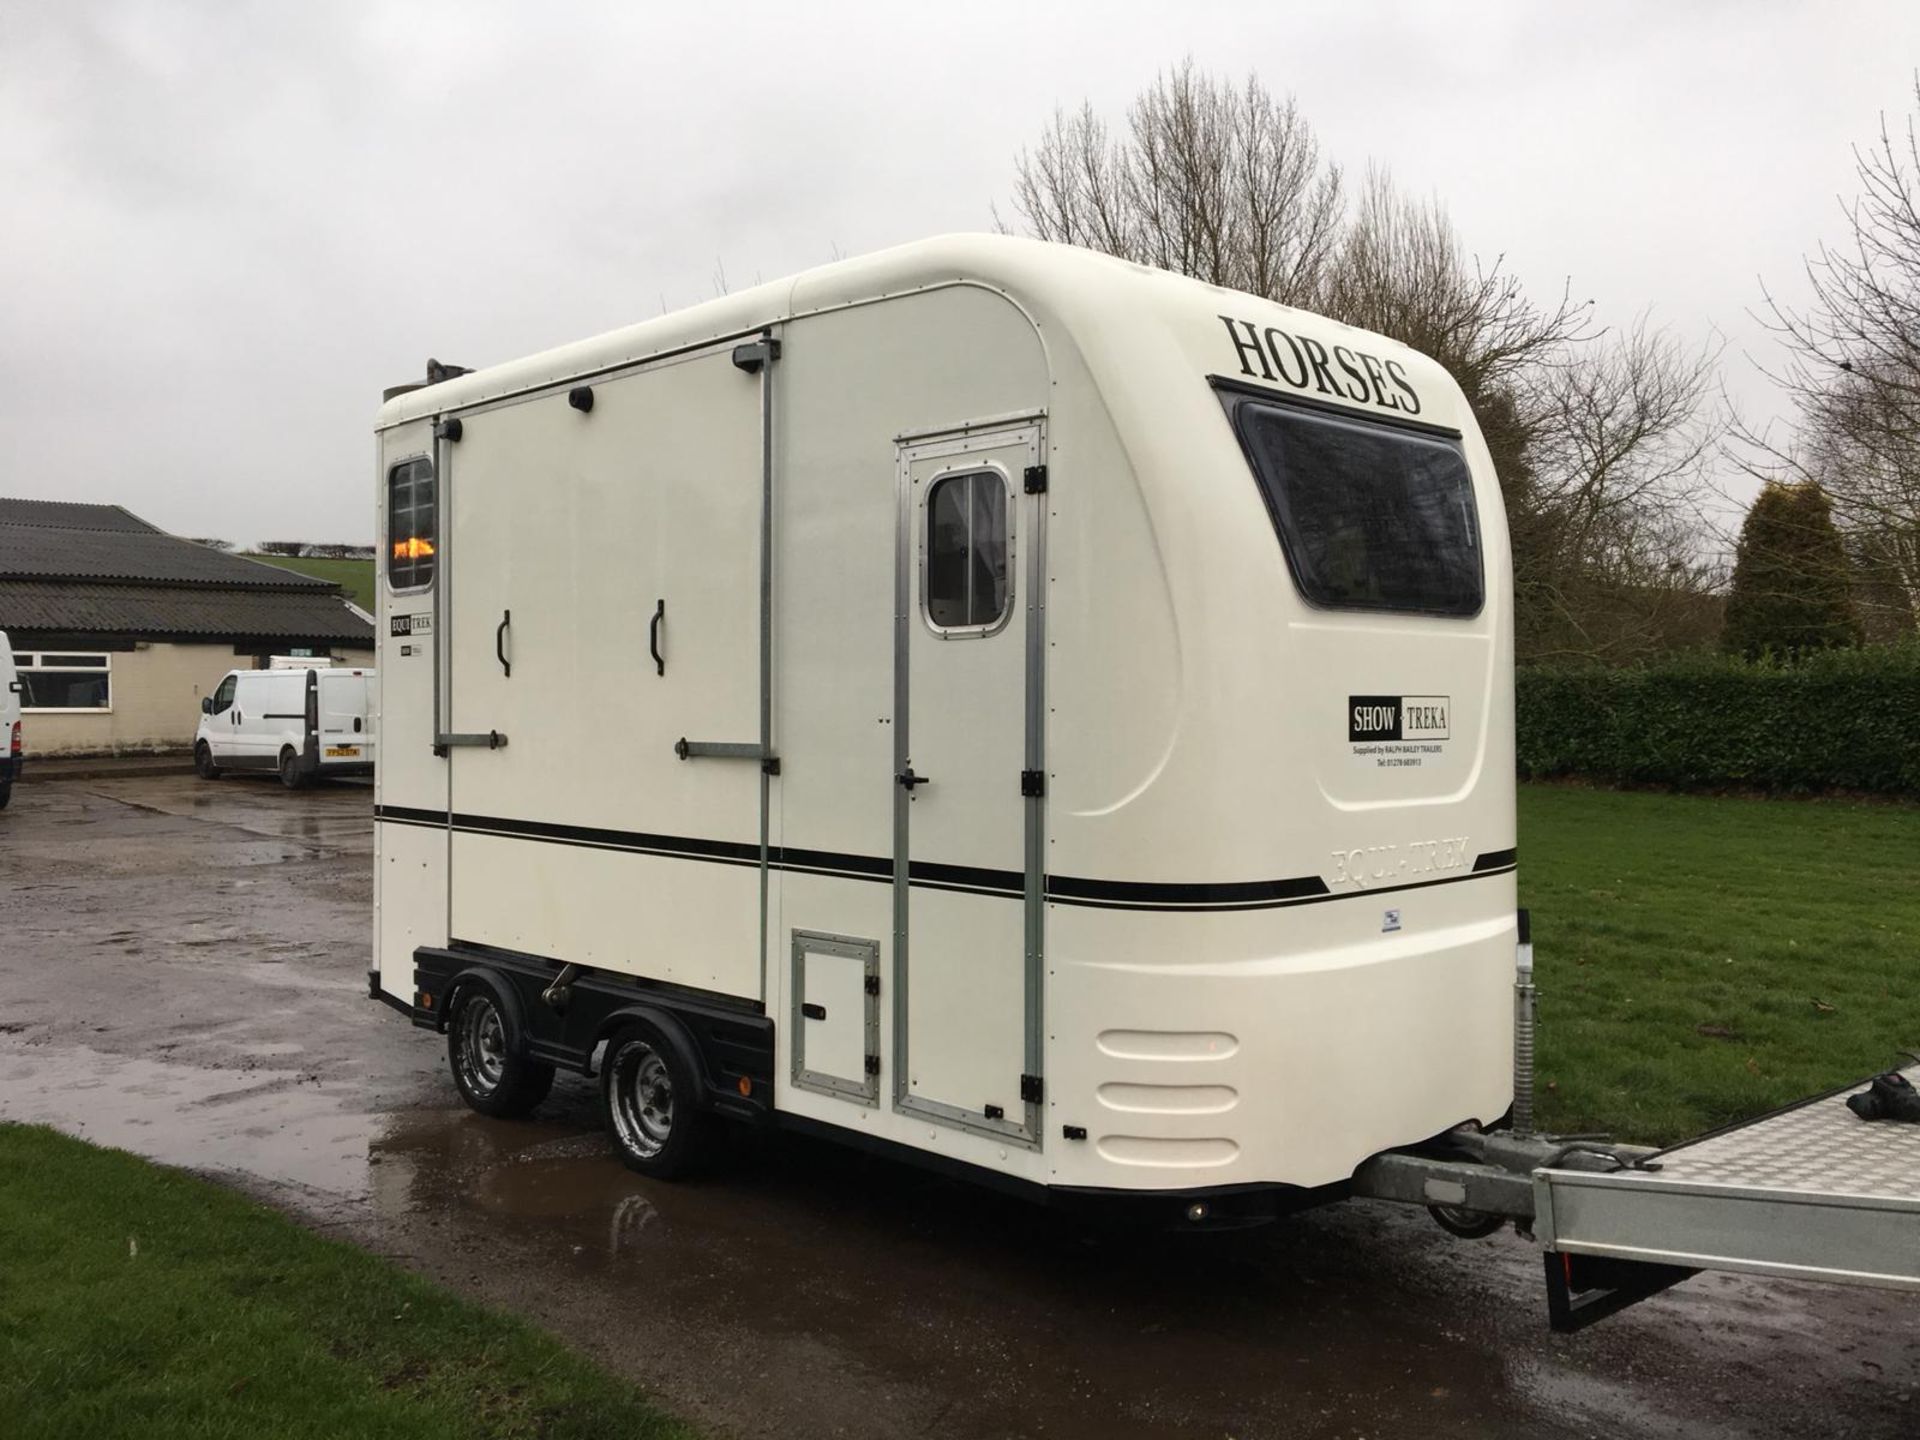 2011 SHOW TREKA M TWIN AXLE 2.6T HORSE BOX TRAILER WITH BUNK BEDS IN THE FRONT *NO VAT*